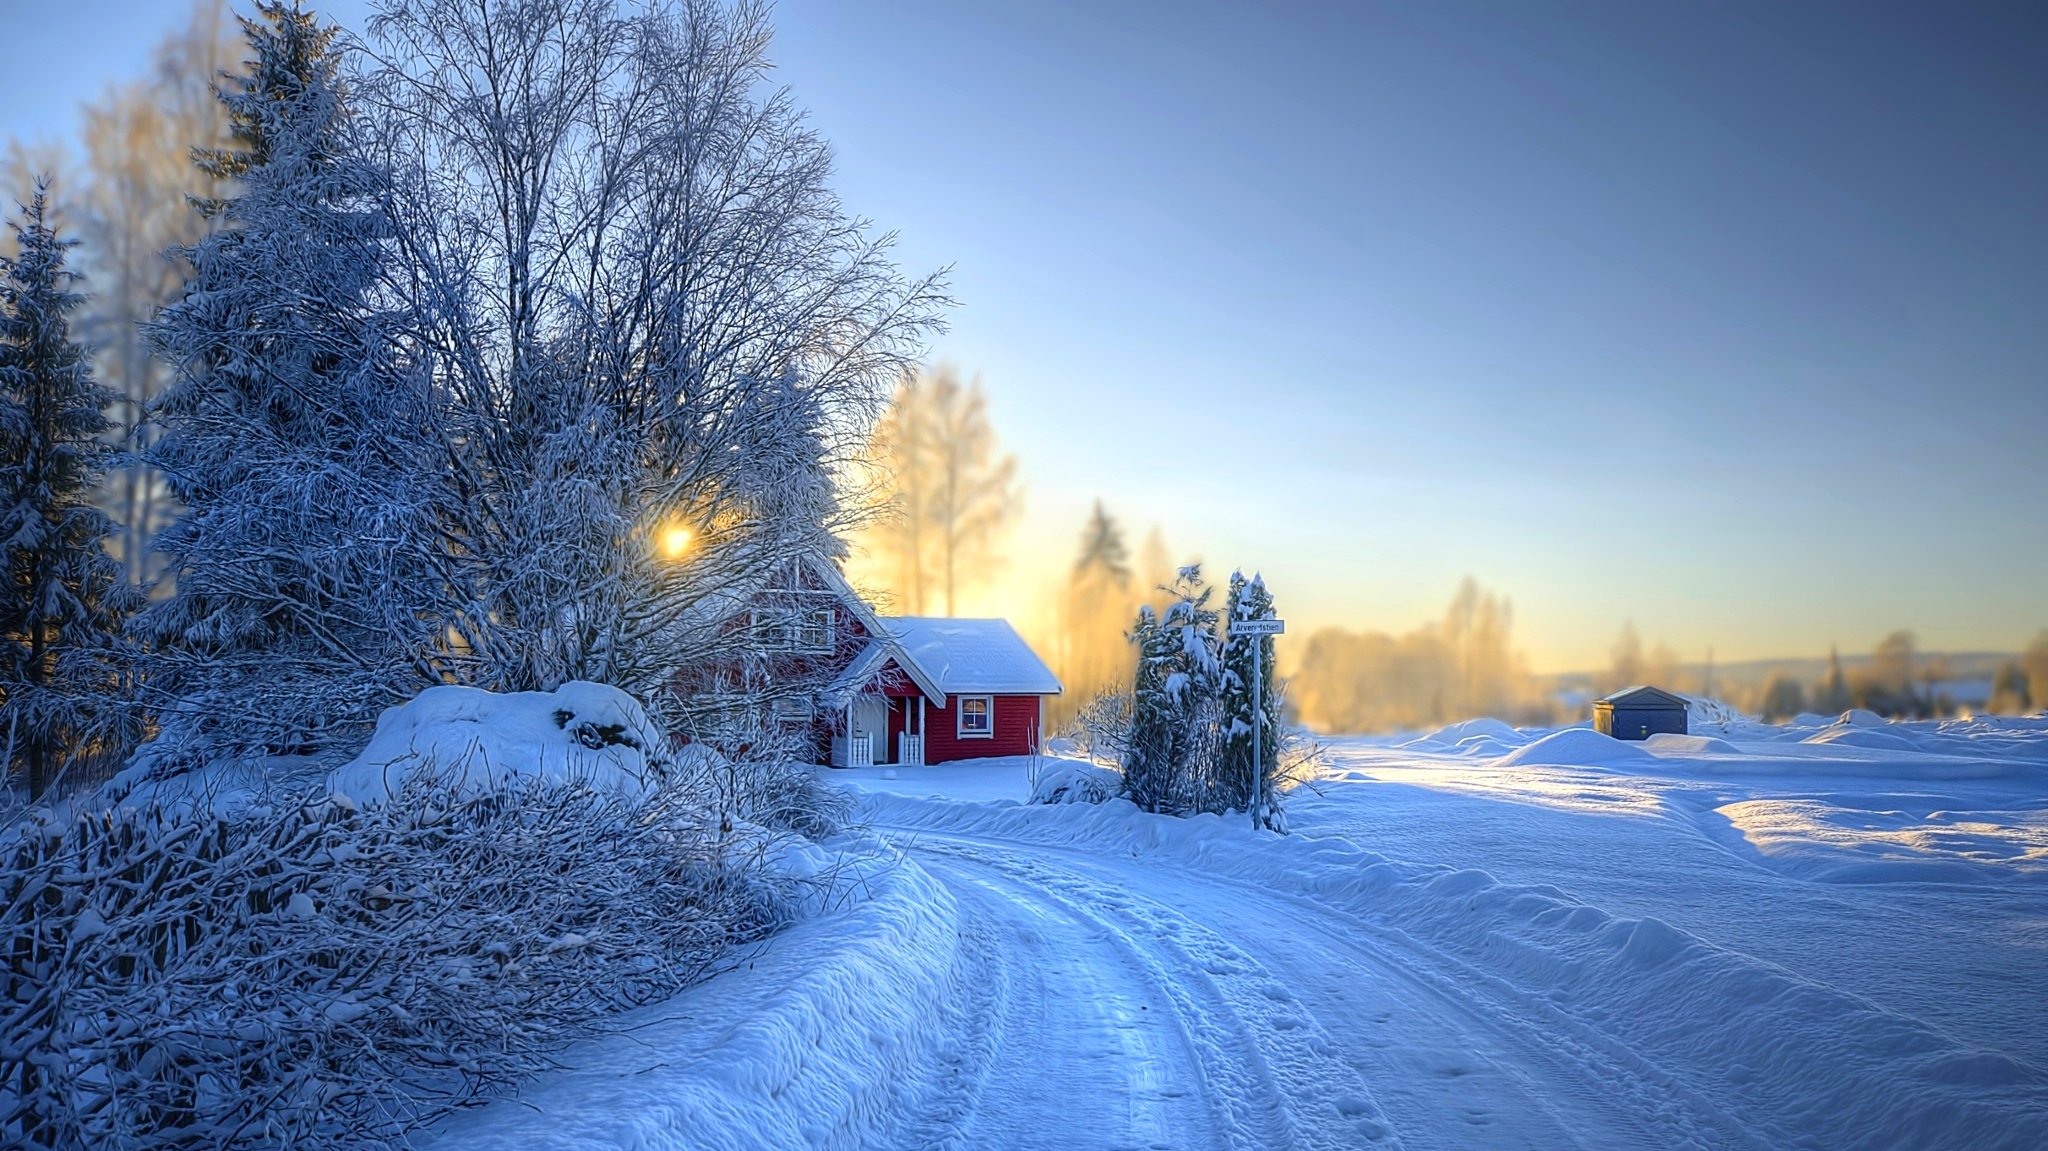 trees, Snow, House, Beautiful, Winter, White, Road, Sunset, Frost, Cold Wallpaper